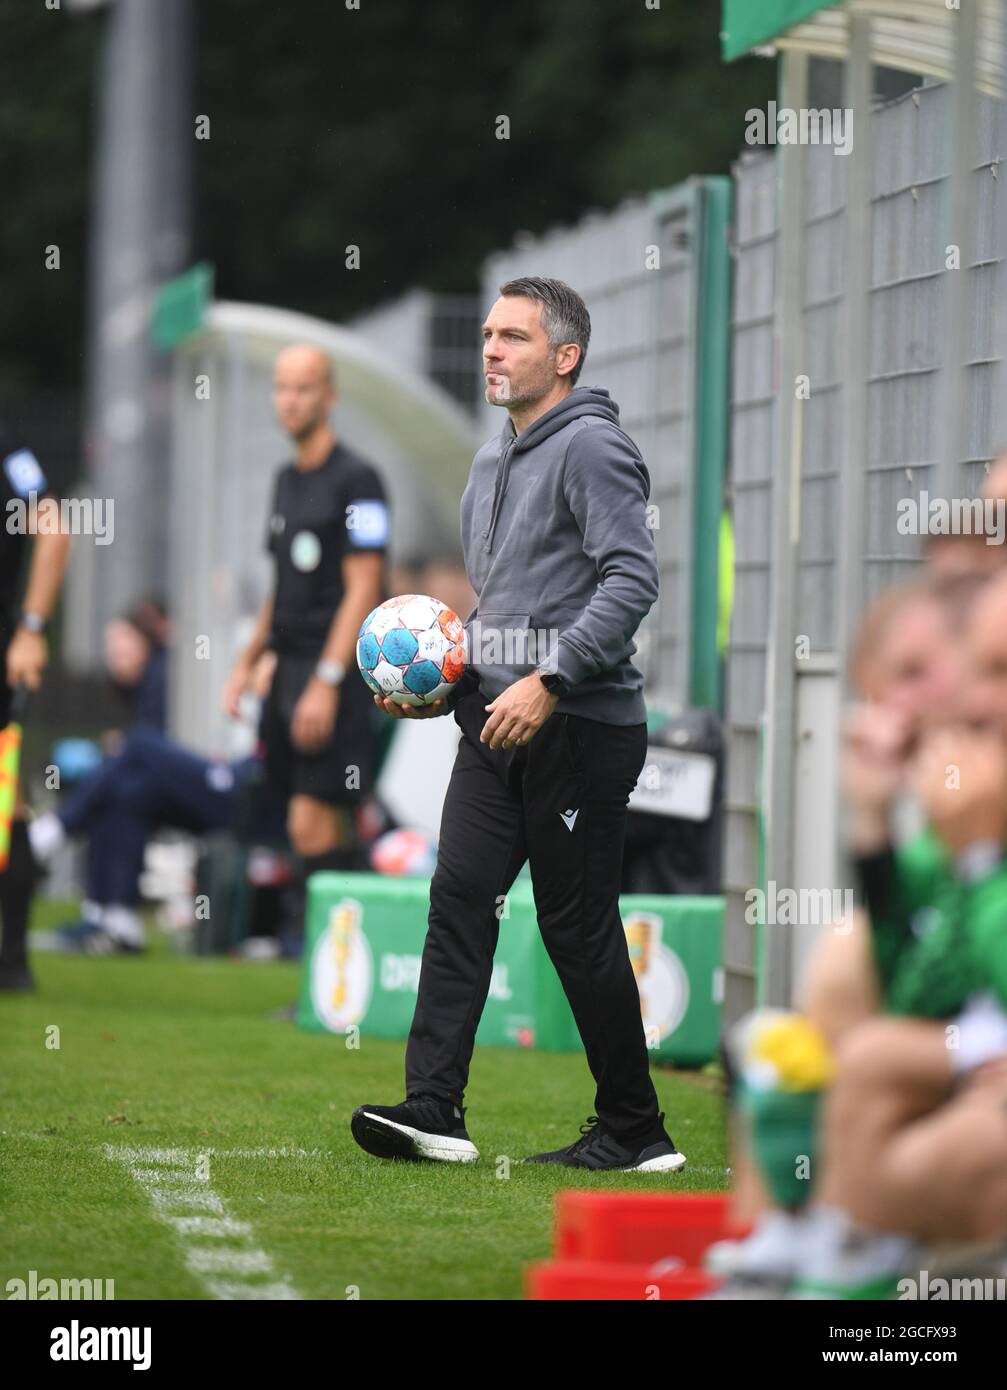 Norderstedt, Germany. 07th Aug, 2021. Football: DFB Cup, Eintracht Norderstedt - Hannover 96, 1st round at Edmund-Plambeck-Stadion. Hannover's coach Jan Zimmermann is on the sidelines. Credit: Daniel Reinhardt/dpa - IMPORTANT NOTE: In accordance with the regulations of the DFL Deutsche Fußball Liga and/or the DFB Deutscher Fußball-Bund, it is prohibited to use or have used photographs taken in the stadium and/or of the match in the form of sequence pictures and/or video-like photo series./dpa/Alamy Live News Stock Photo